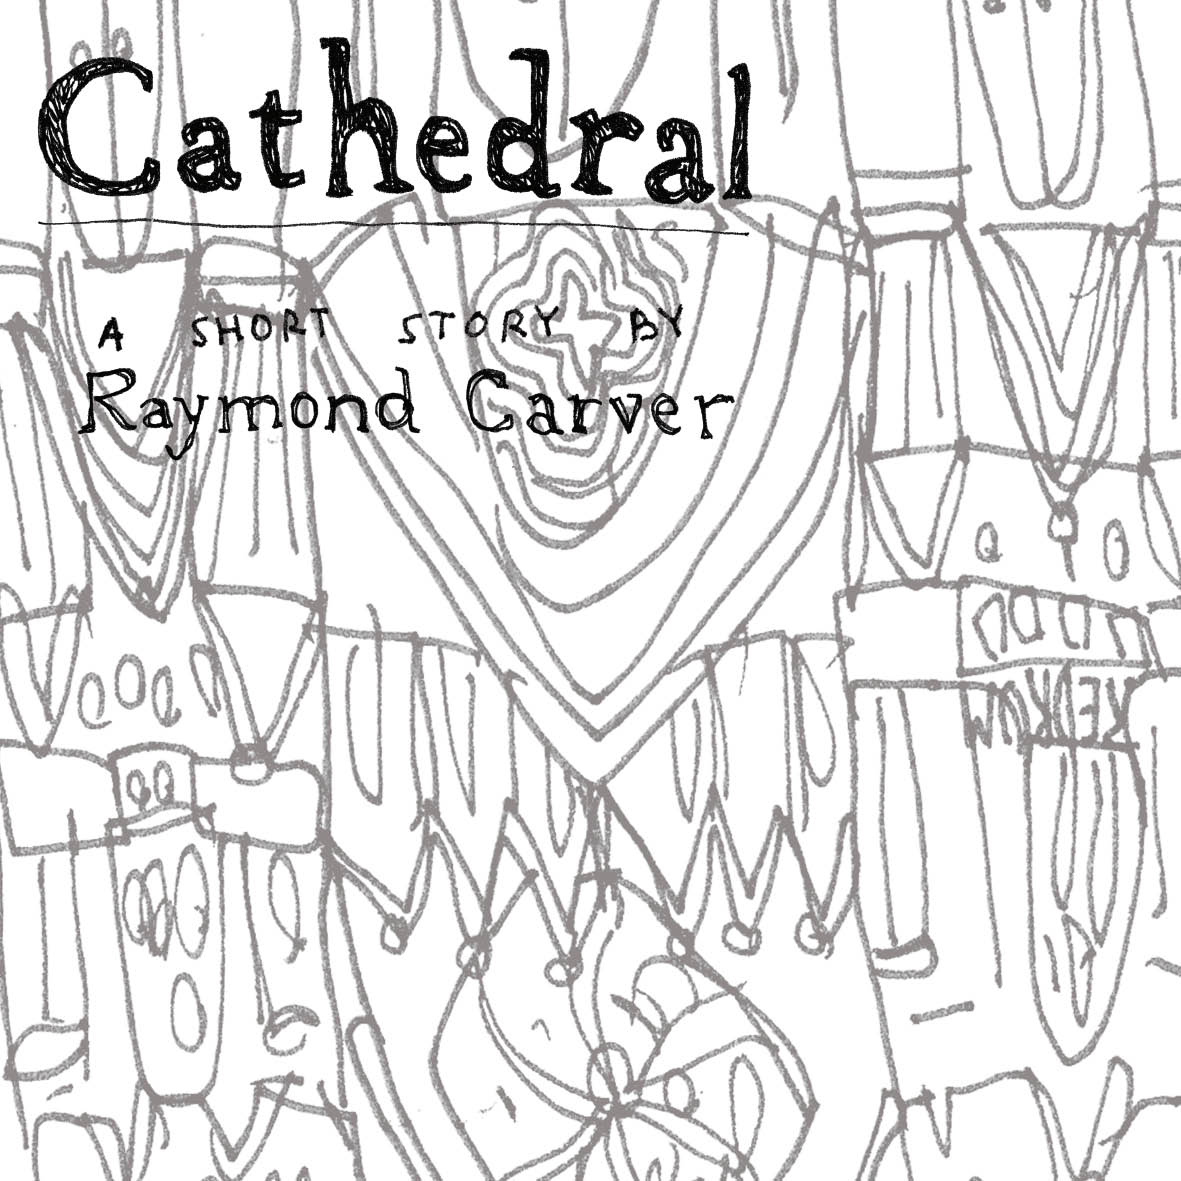 Carvers cathedral essay raymond